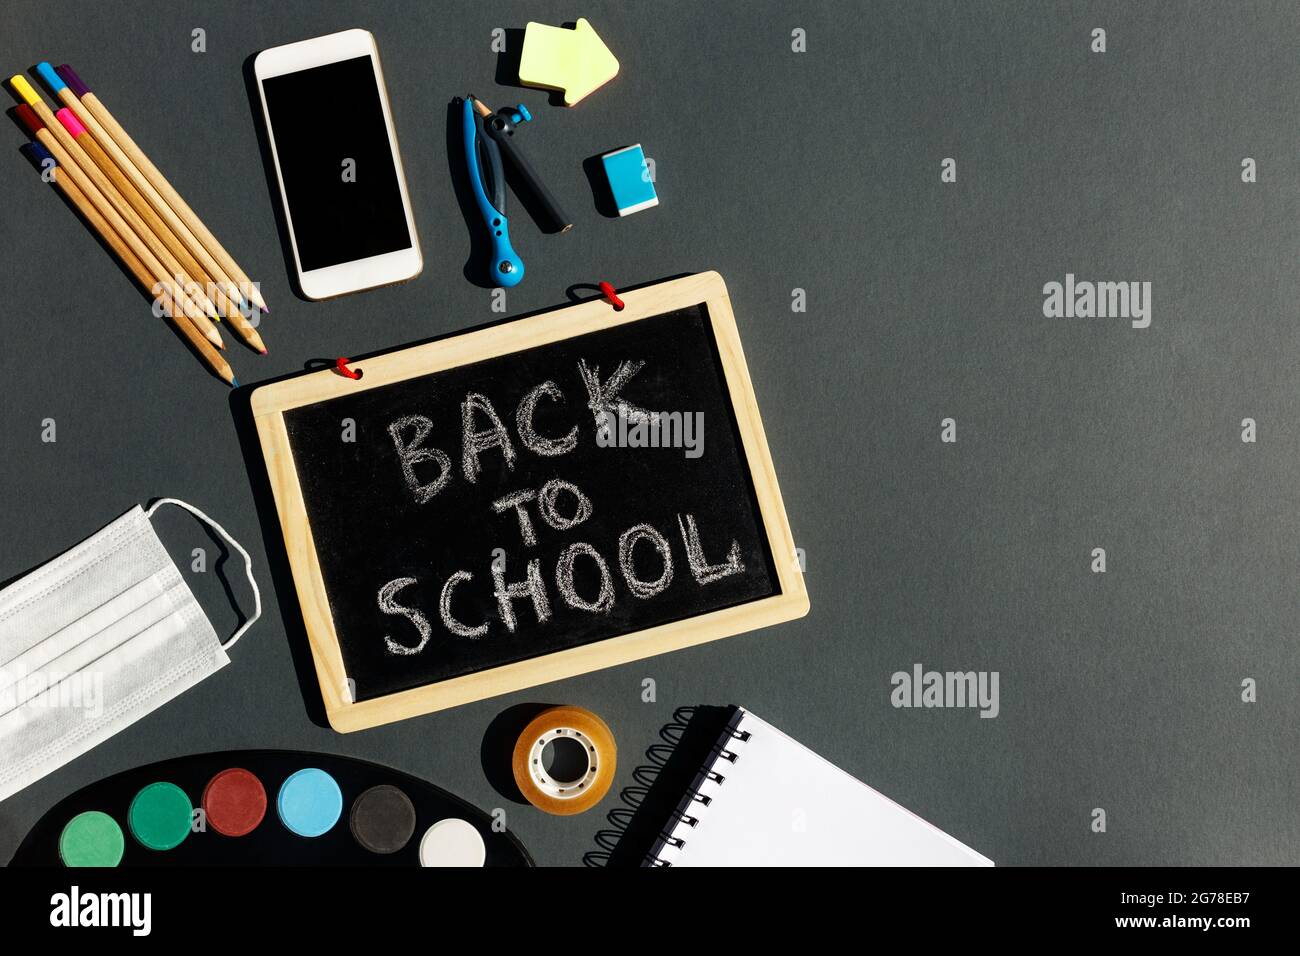 E- learning,Online education, School stationery supplies, medical mask, social distancing, school reopening. Back to school after covid-19 pandemic. New normal concept.Top view copy space,blackboard. Stock Photo